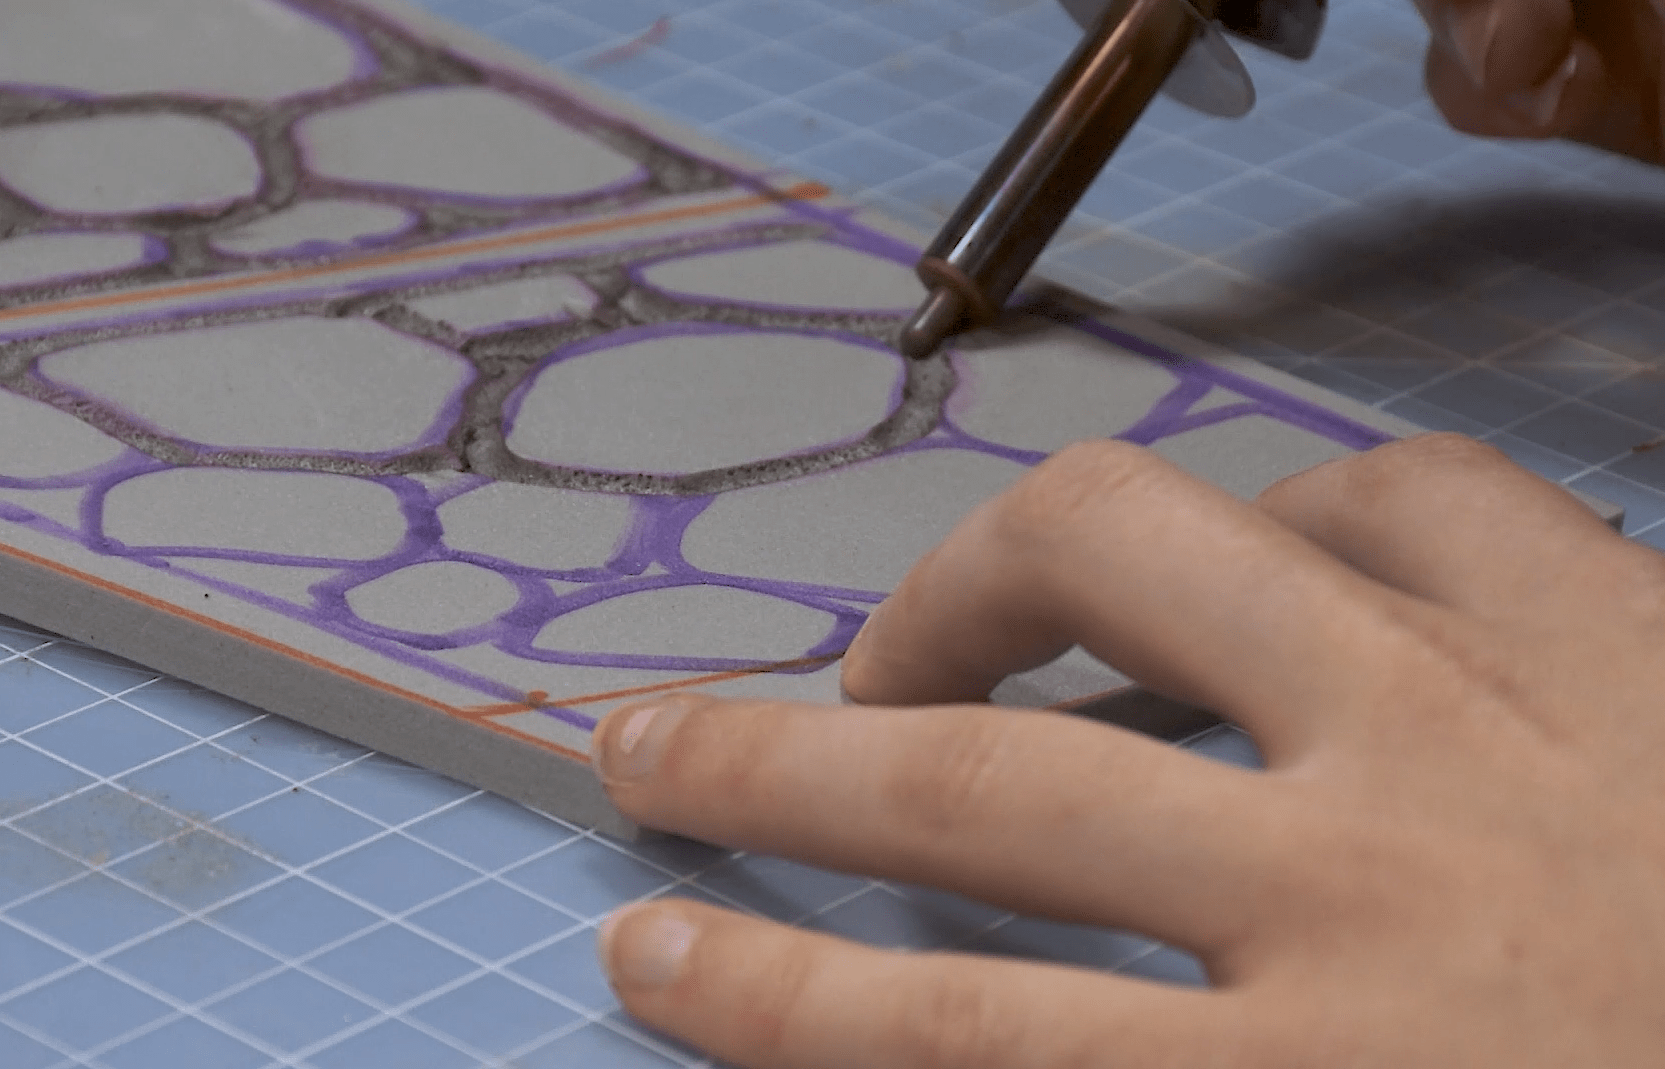 Cosplayer carving dragon scales into EVA foam using a soldering iron